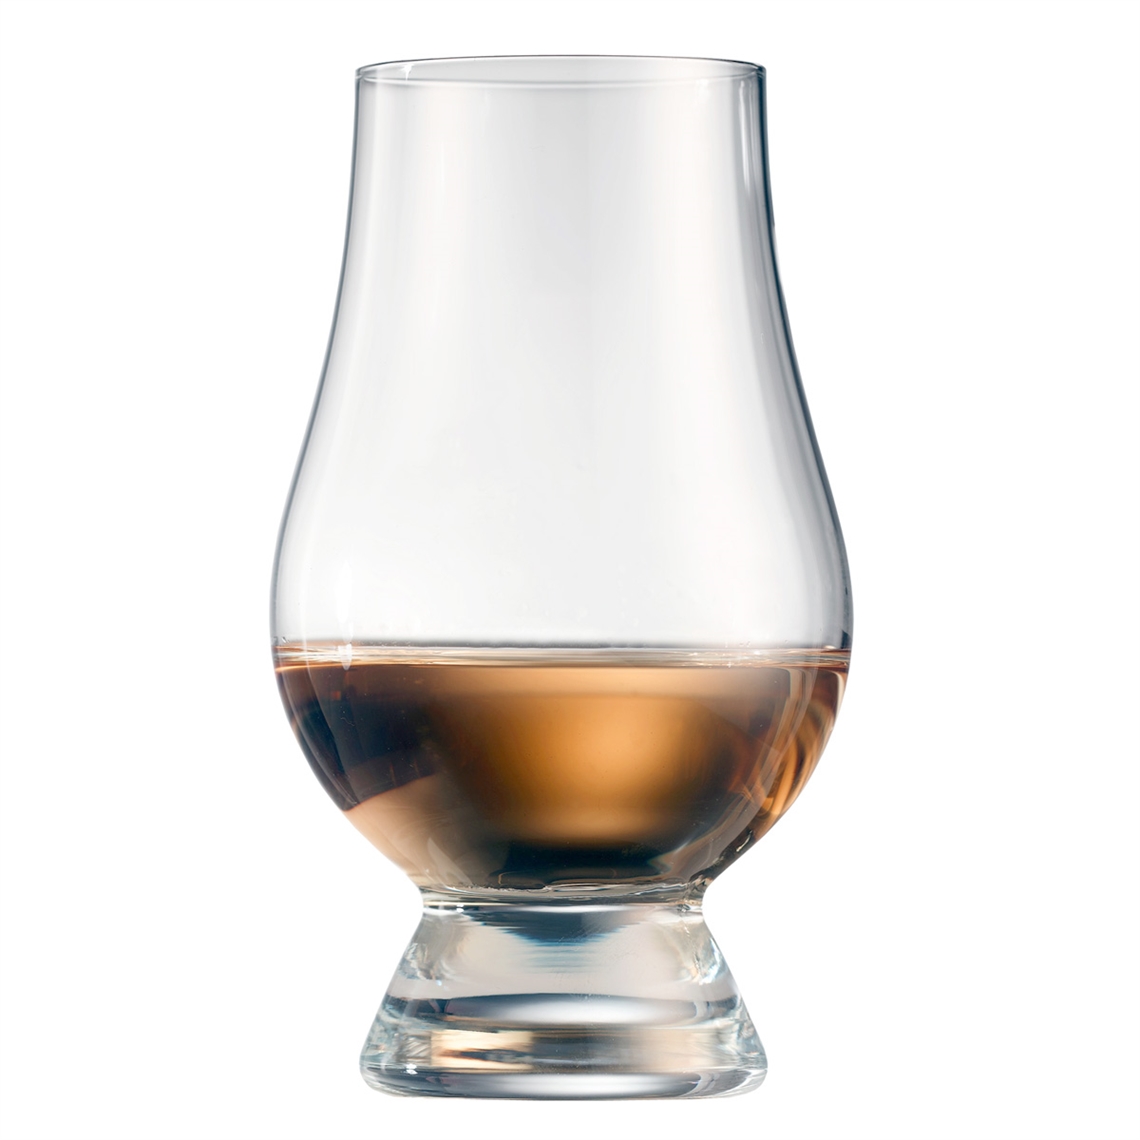 View more wine glass storage from our Whisky Glasses range